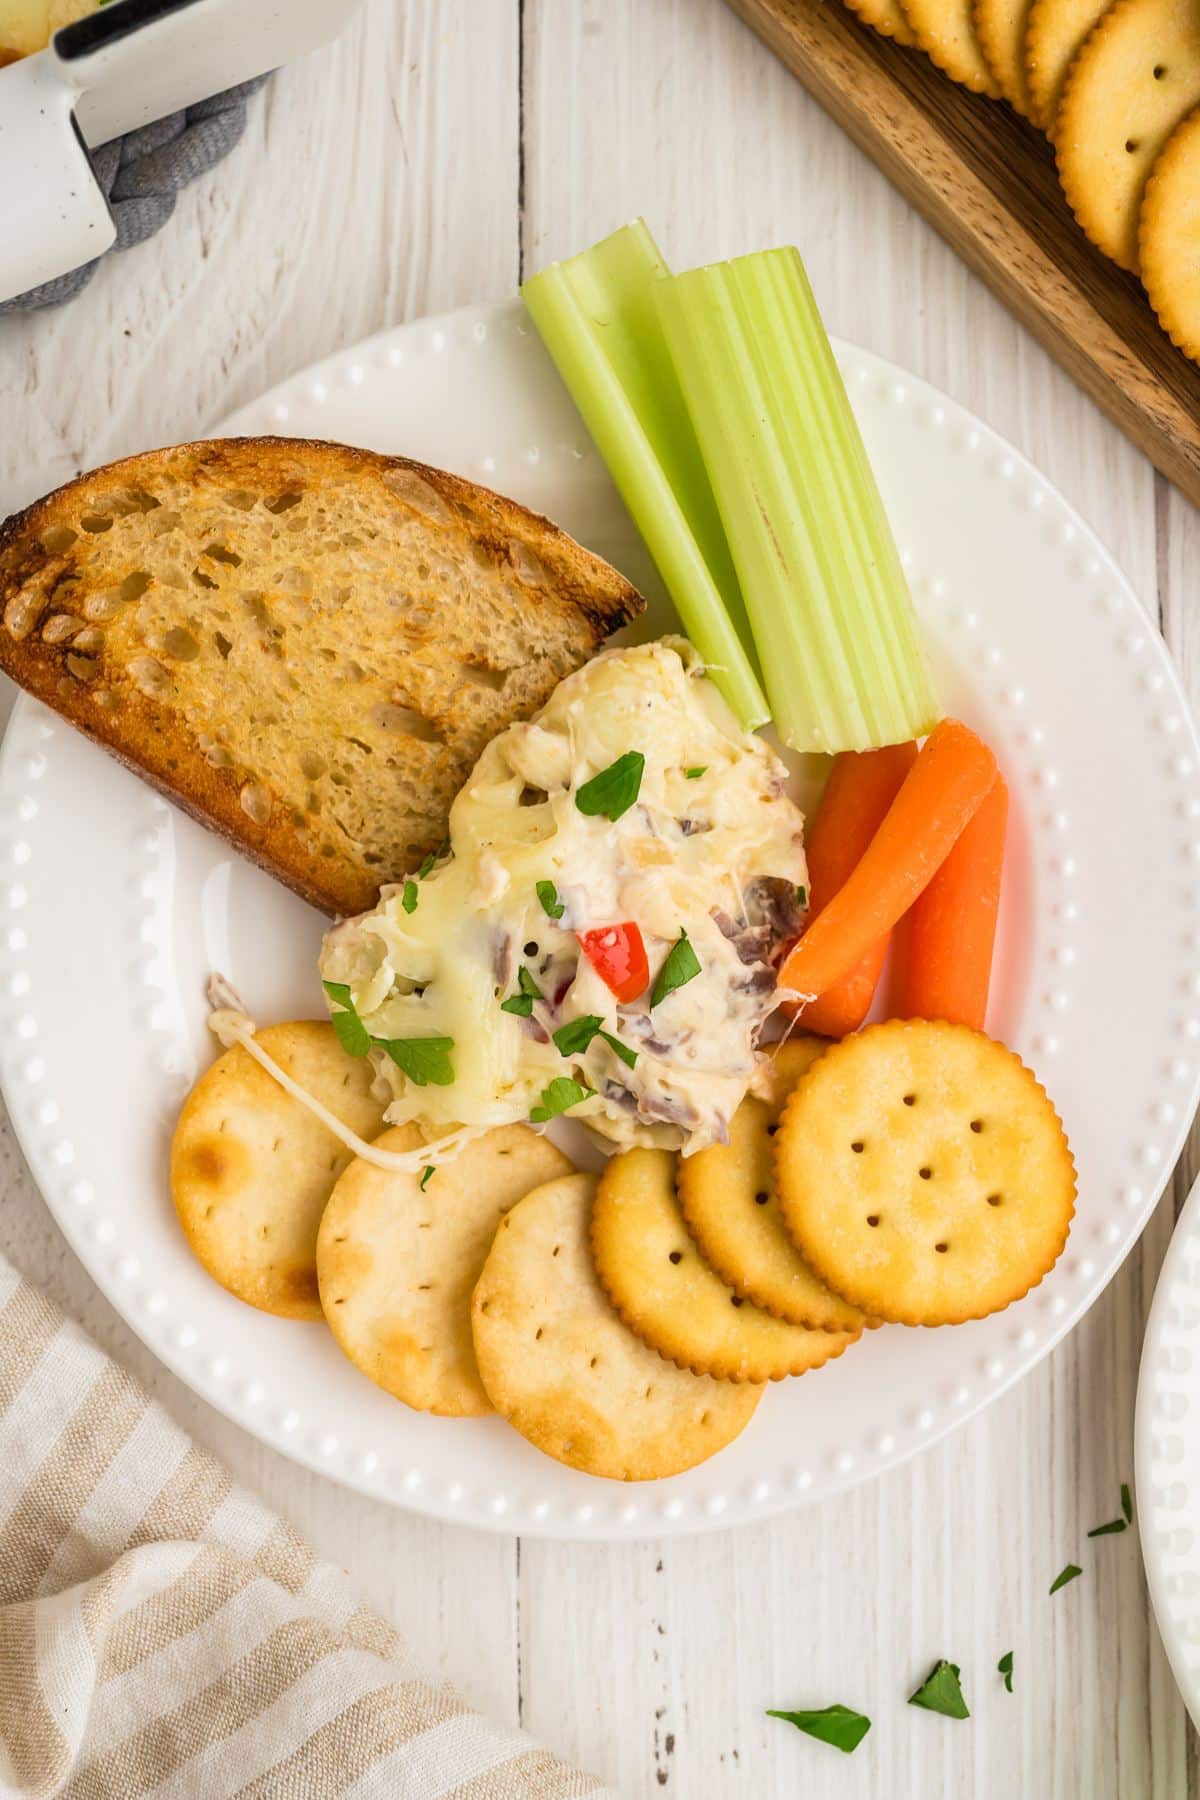 Steak and cheese dip on a plate with toasted bread, crudite and butter crackers.